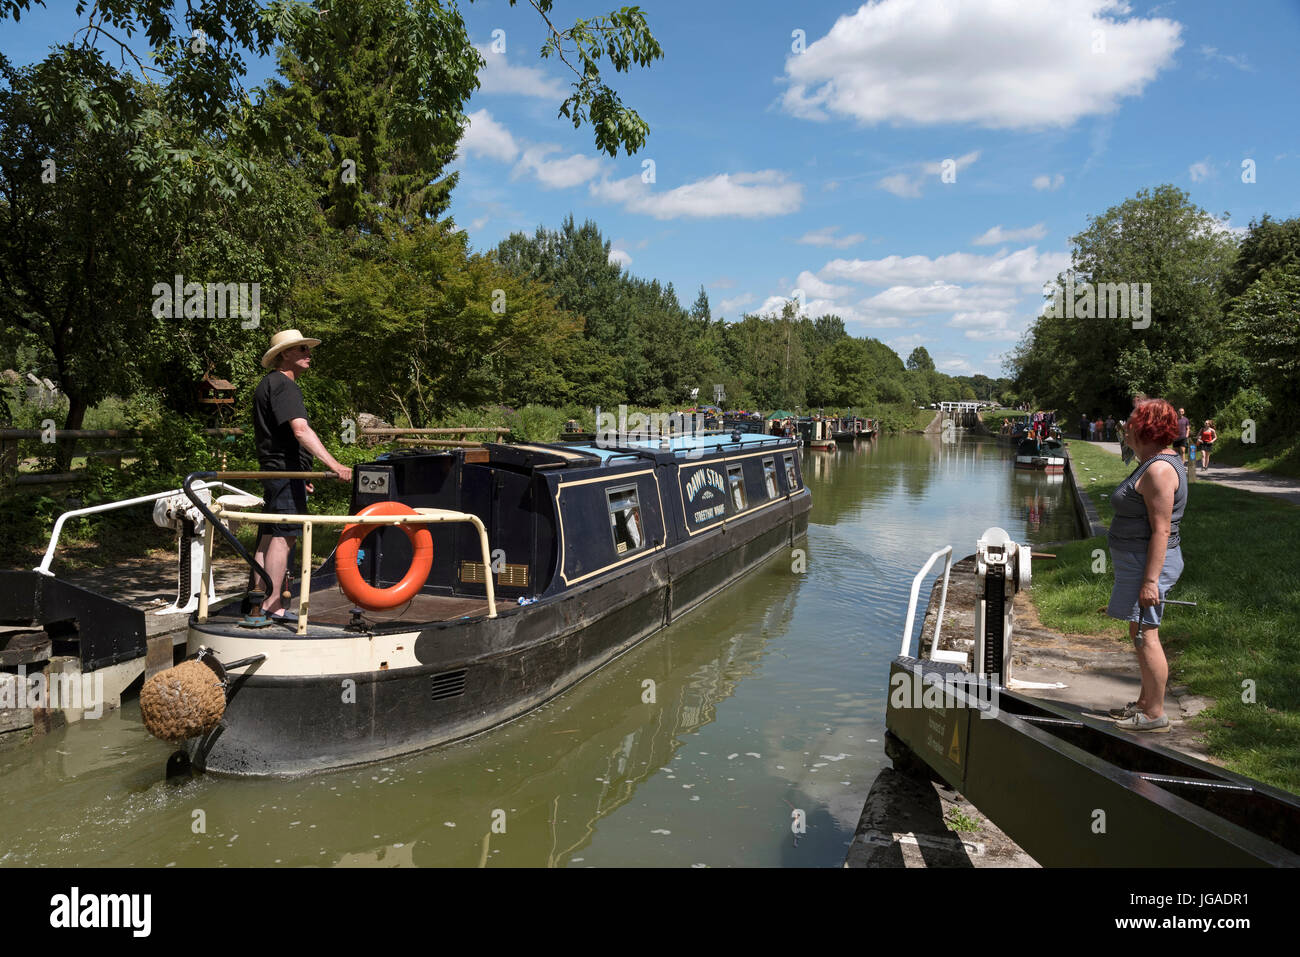 Holiday rental canalboat exiting a lock  on the Kennet & Avon Canal close to Devizes in Wiltshire England UK. Stock Photo